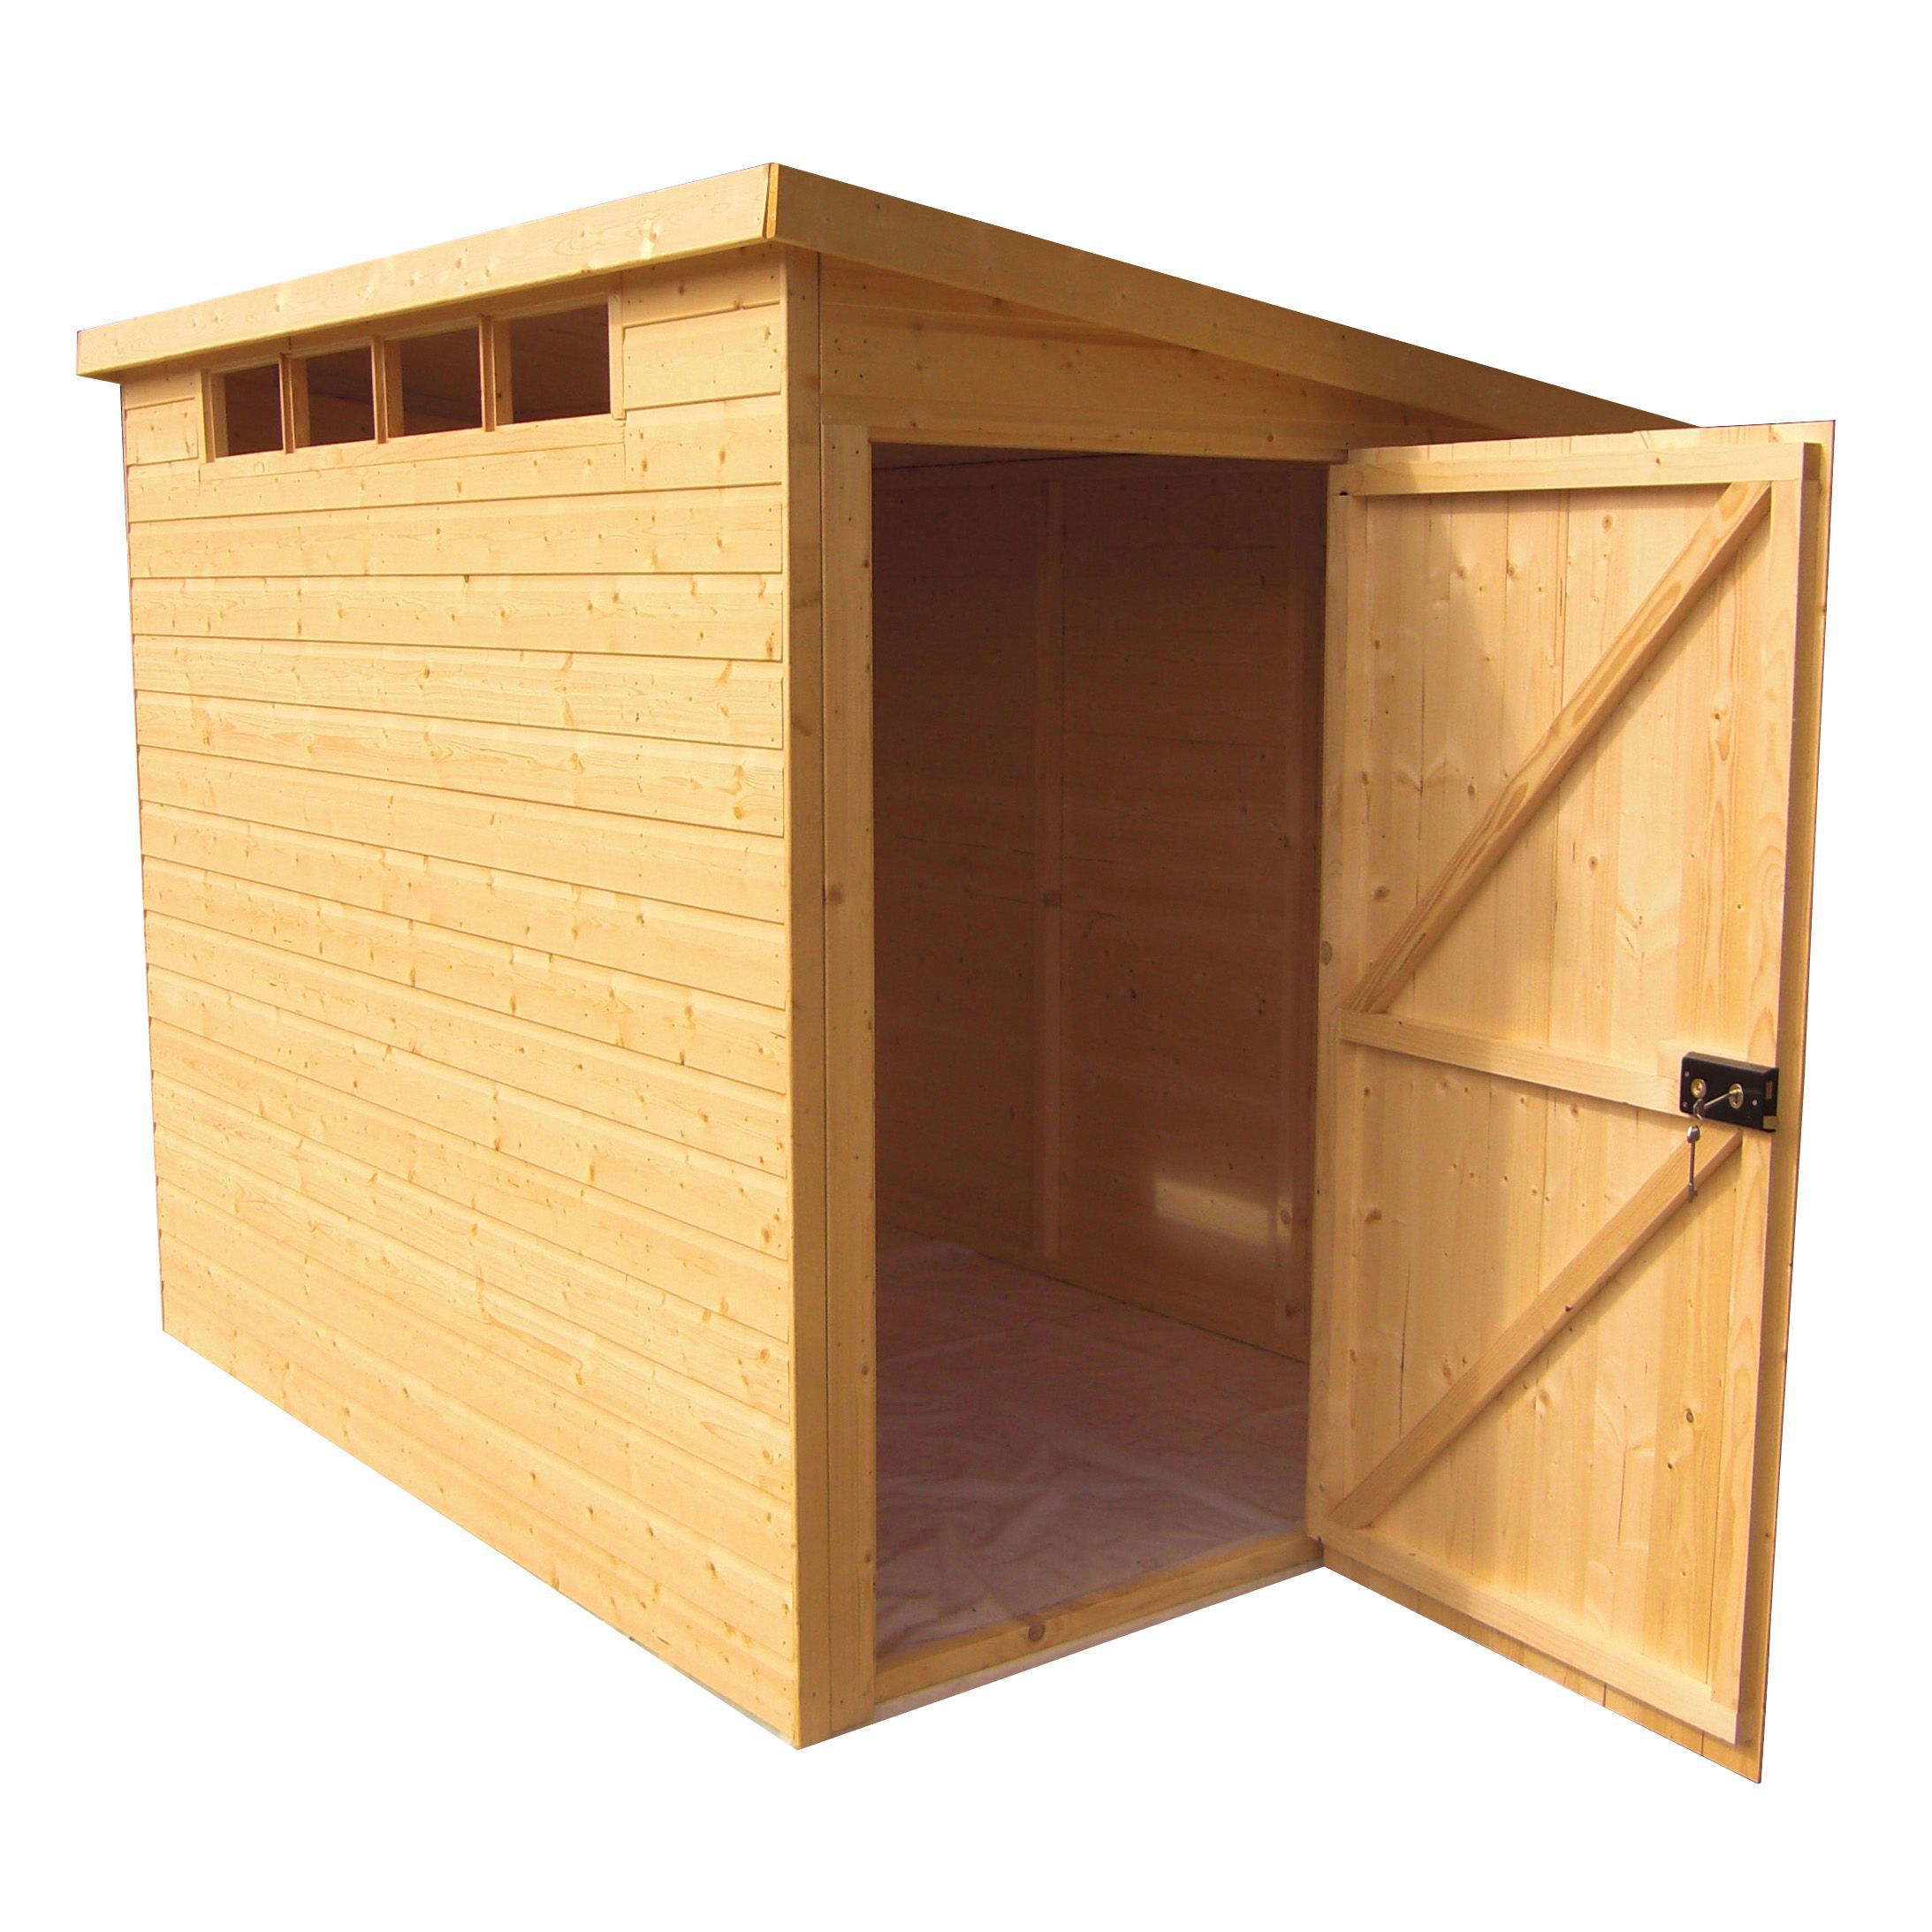 Shire 10x6 Pent Shed - Base not includedAssembly required